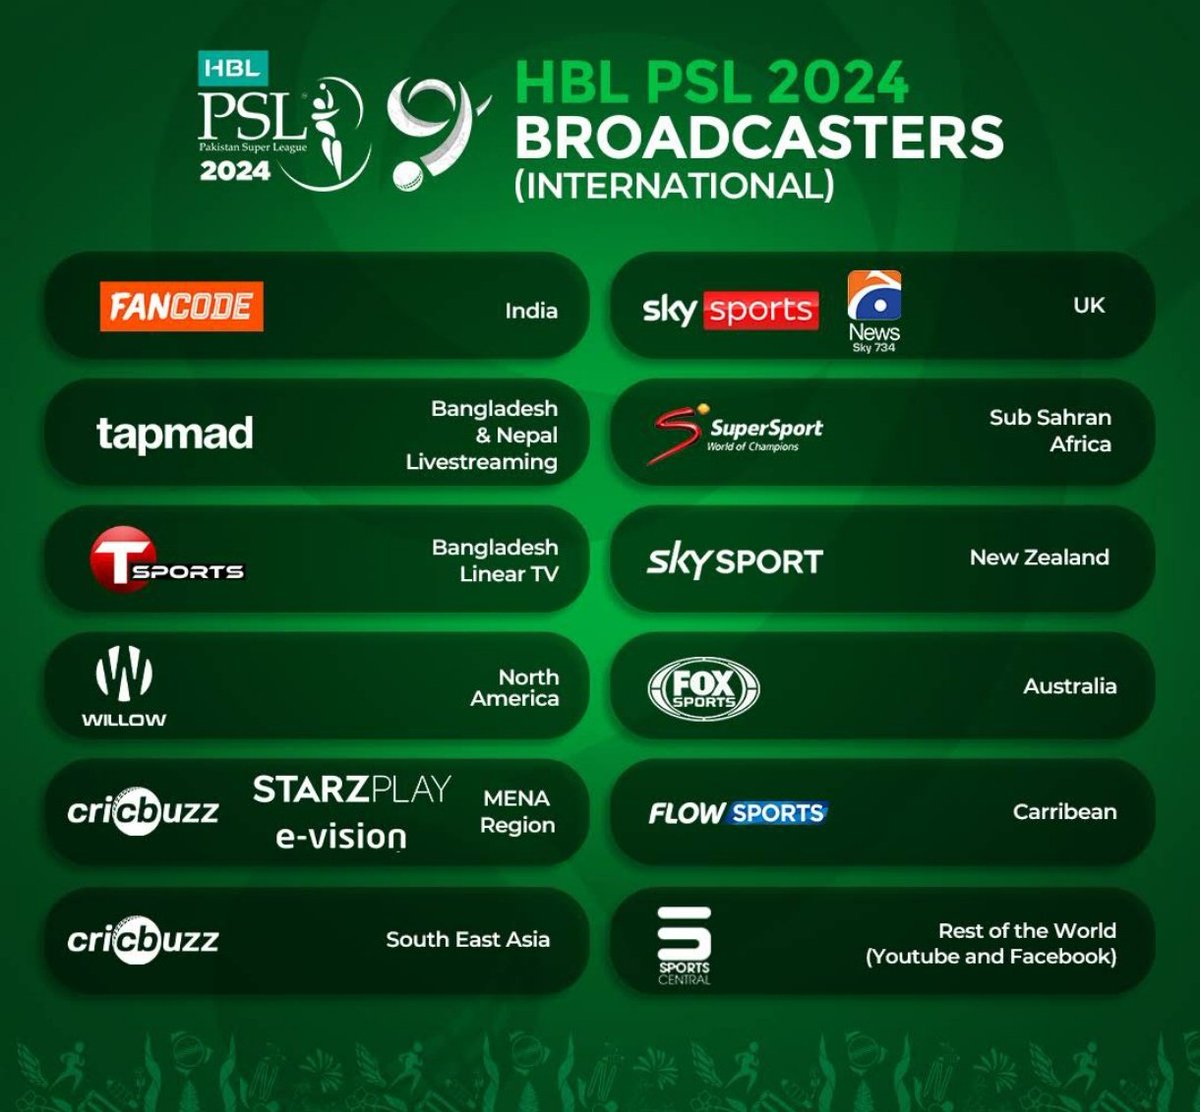 HBL PSL9 going WORLDWIDE!
Catch all the action on  global broadcast
partners.
In association with TransGroup (#HBLPSL Global
Media Rights Partners)
#HBLPSL9 #HBLPSL2024 #PSL9 #PSL2024 #PSLAnthem